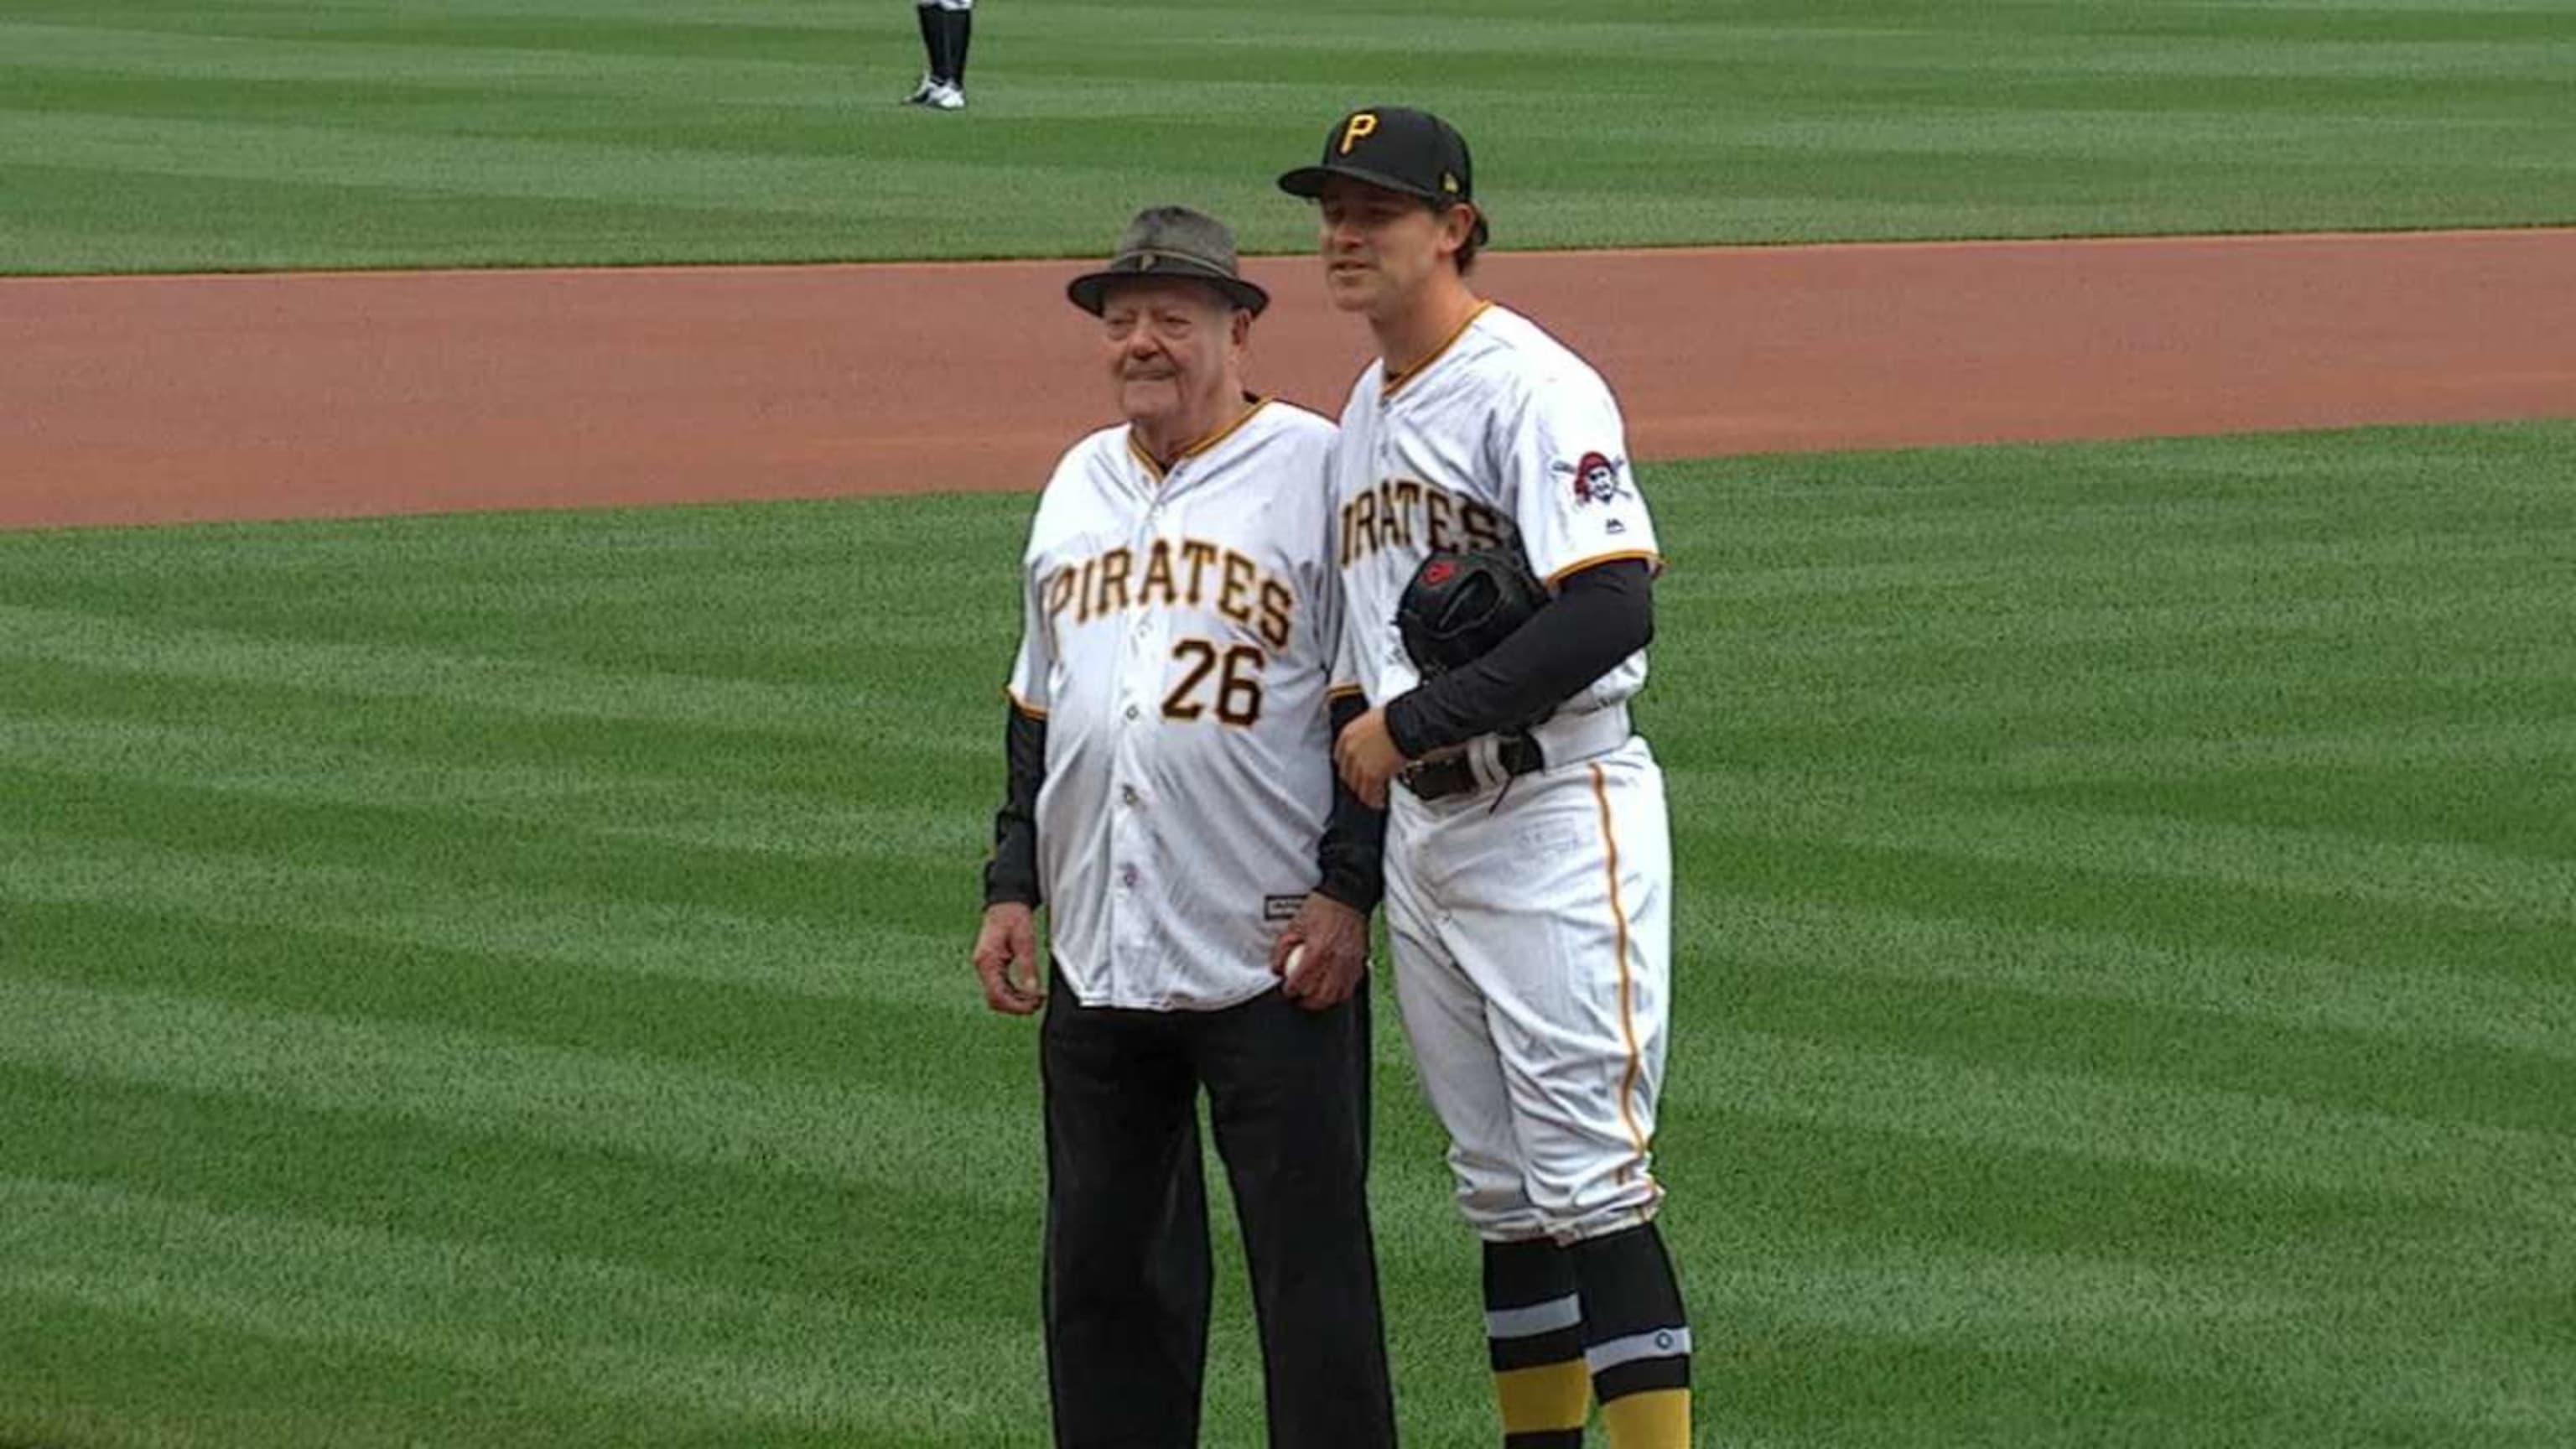 They treat us as if we're royalty': Pirates Hall of Famers thank fans,  teammates for support